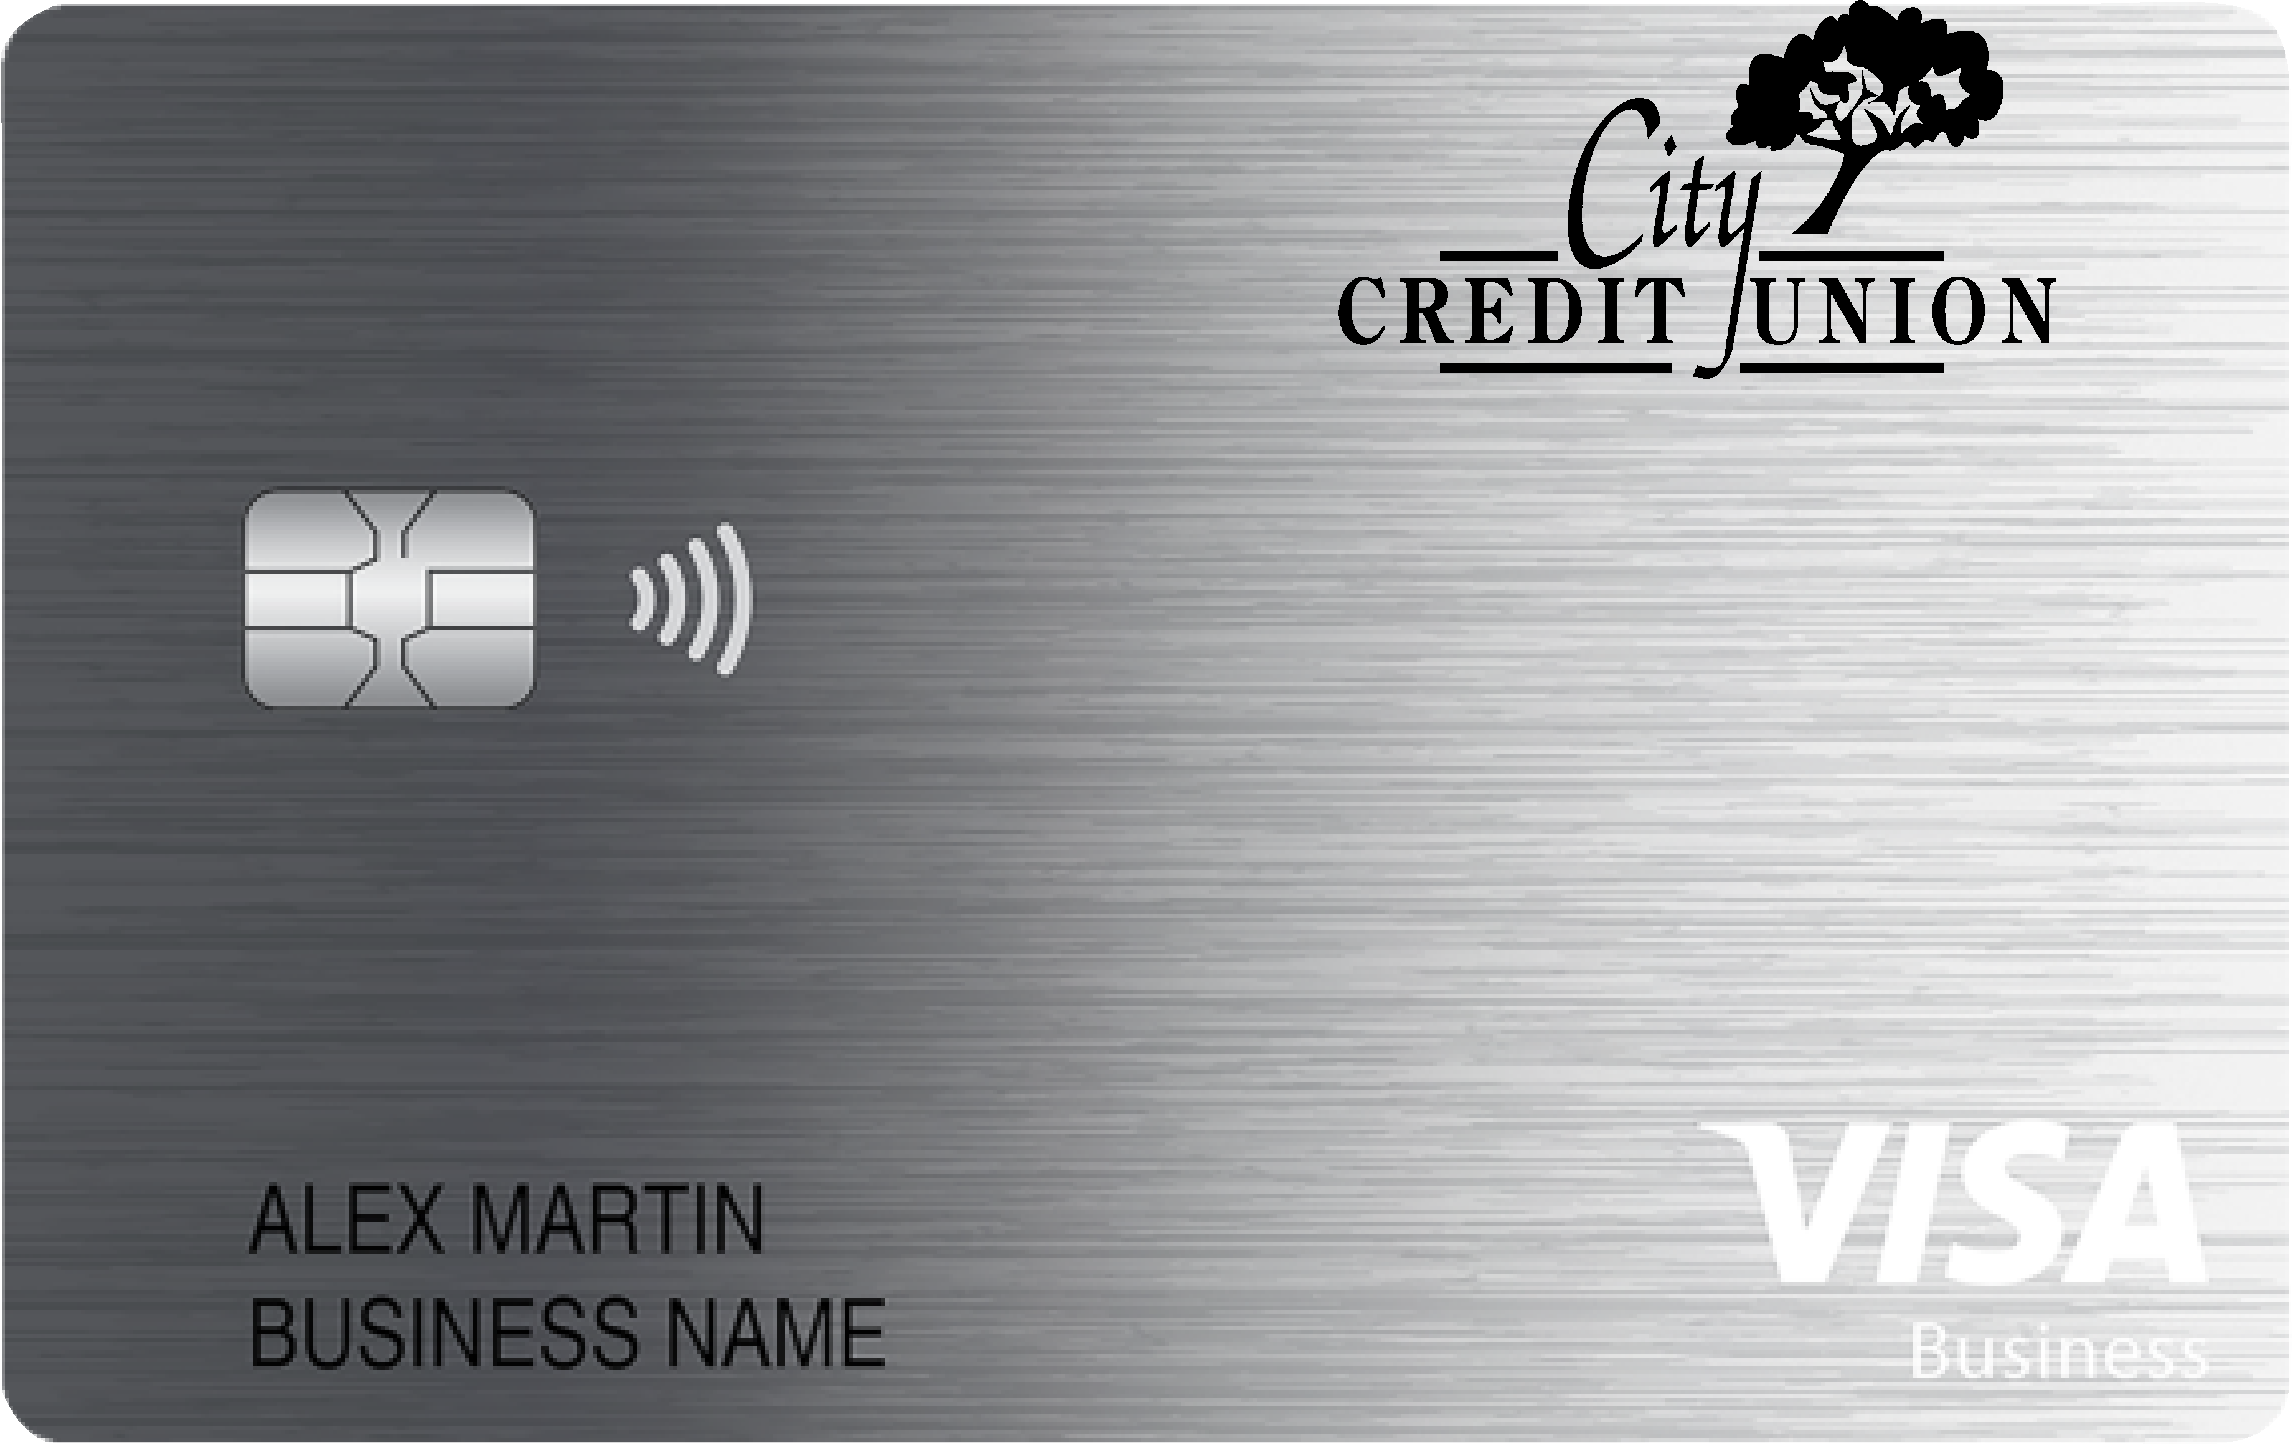 City Credit Union Business Real Rewards Card